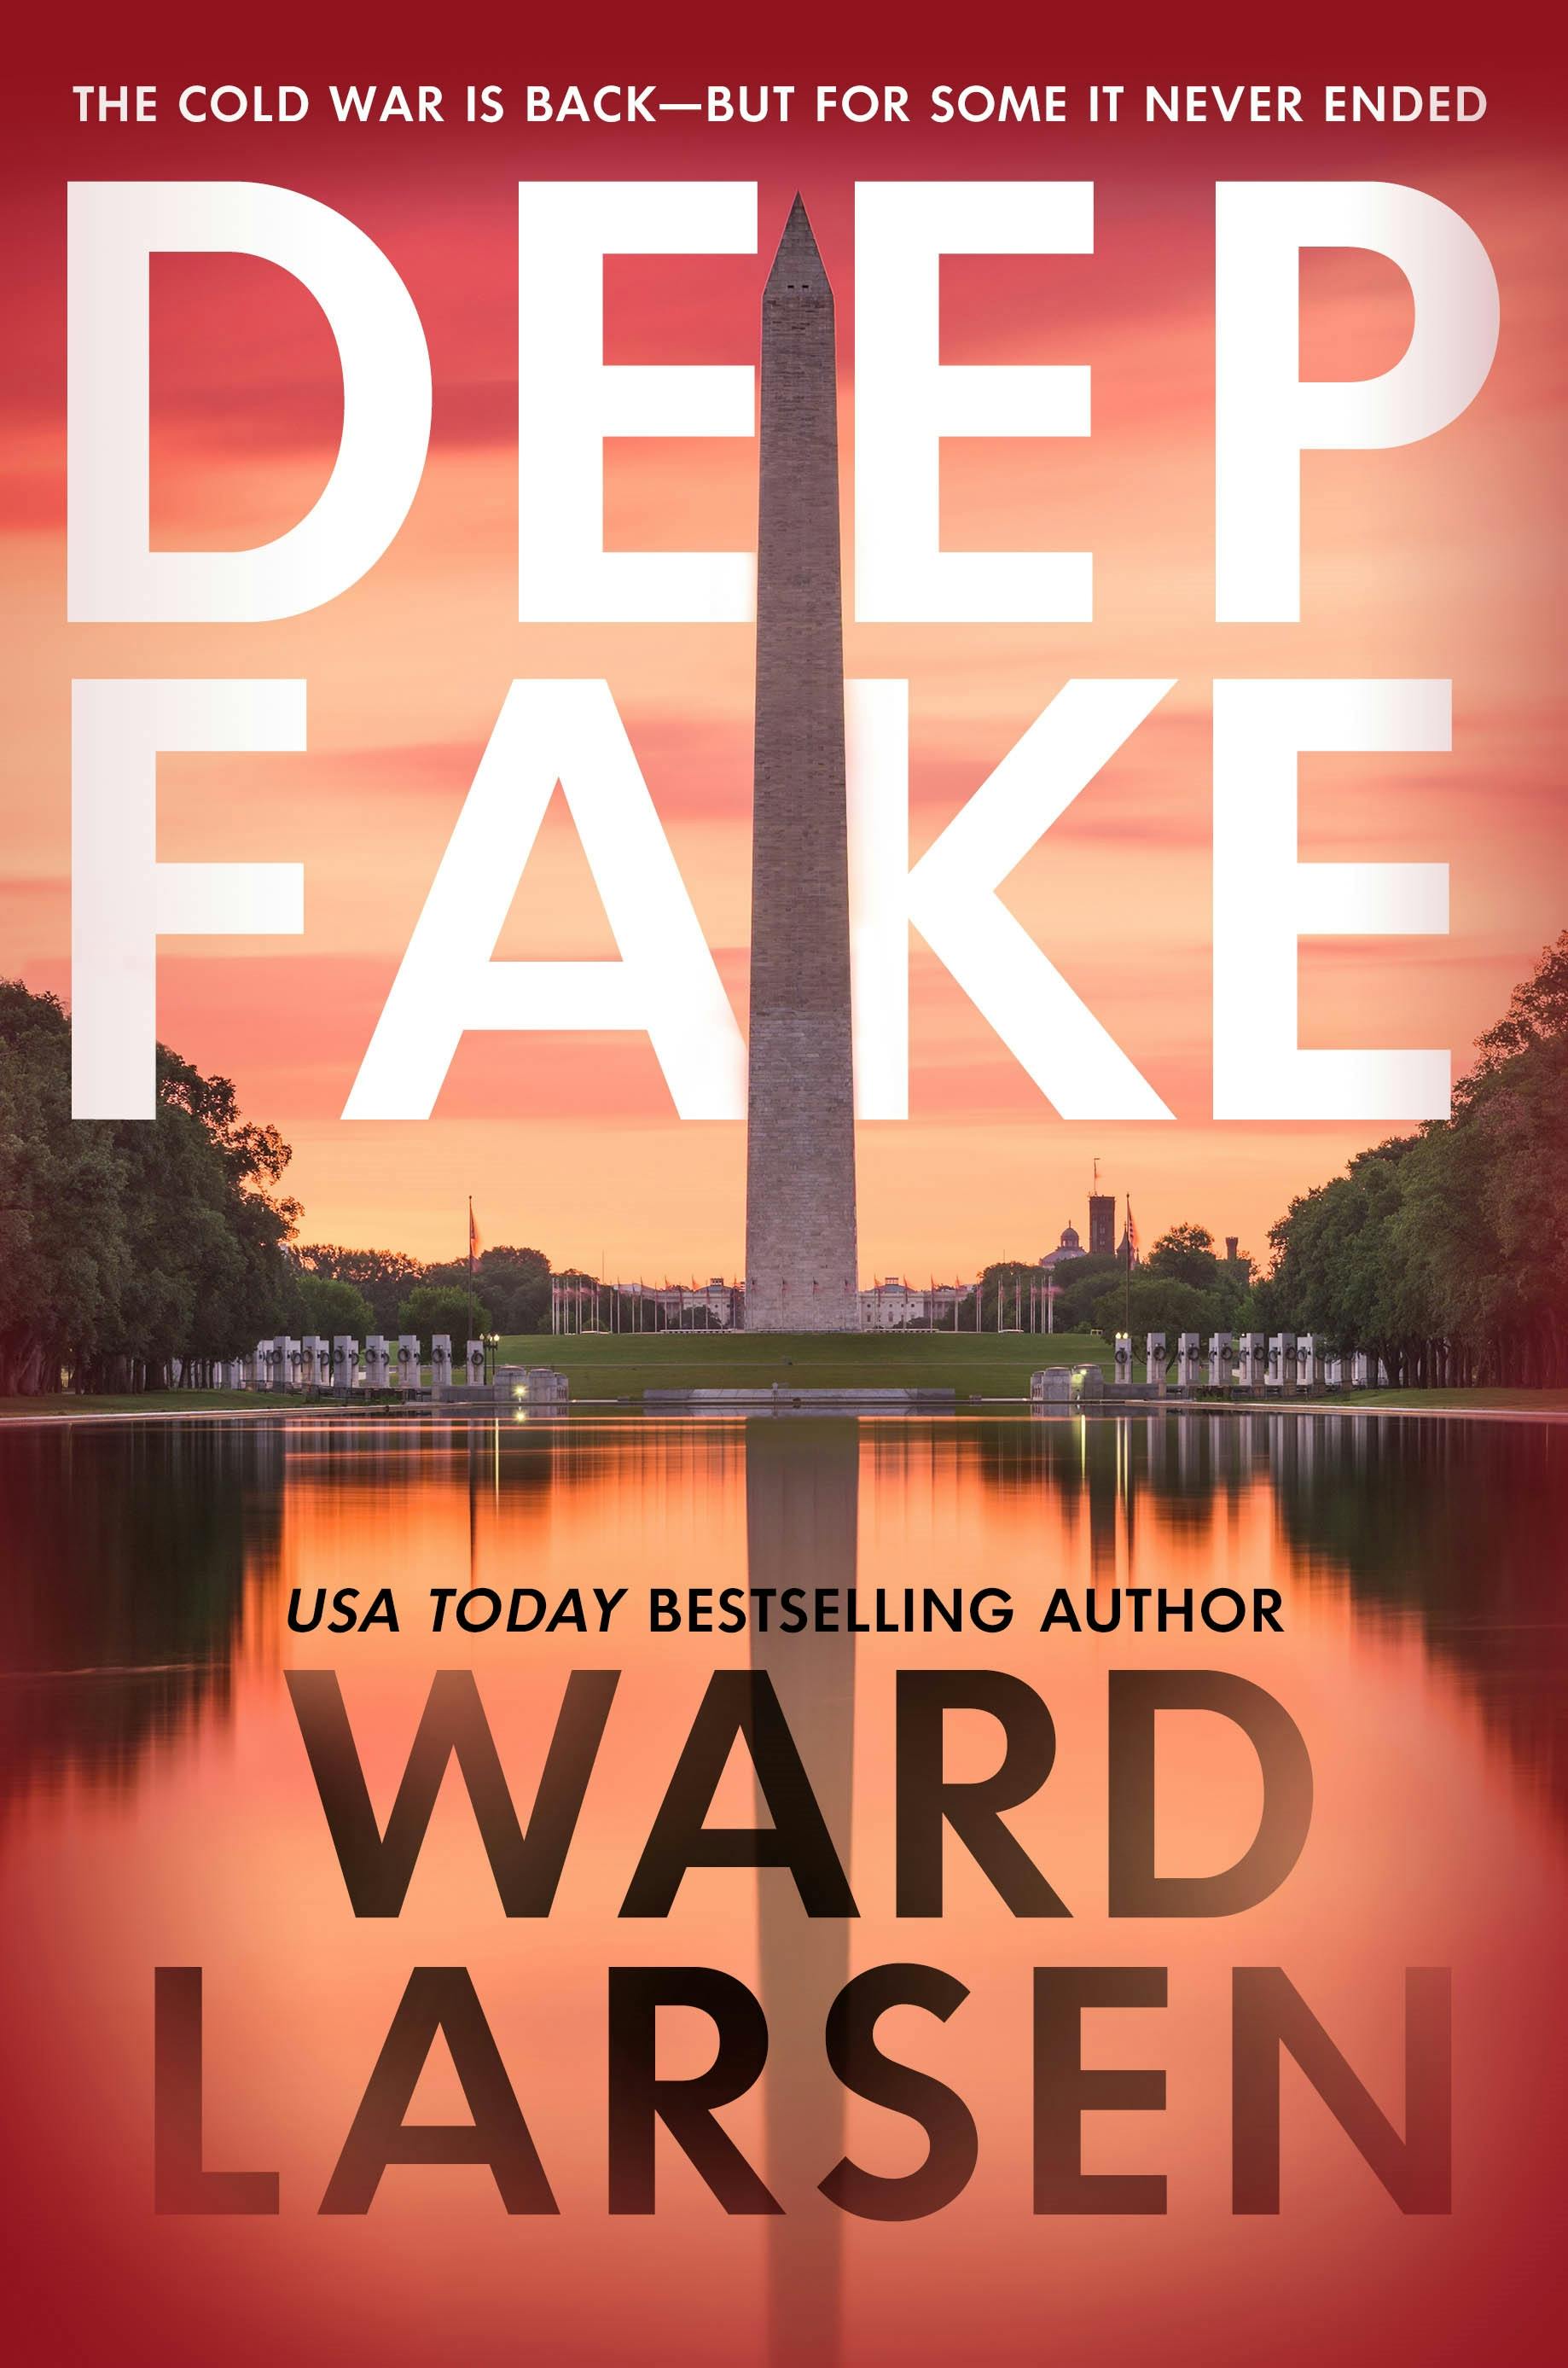 Cover for the book titled as: Deep Fake